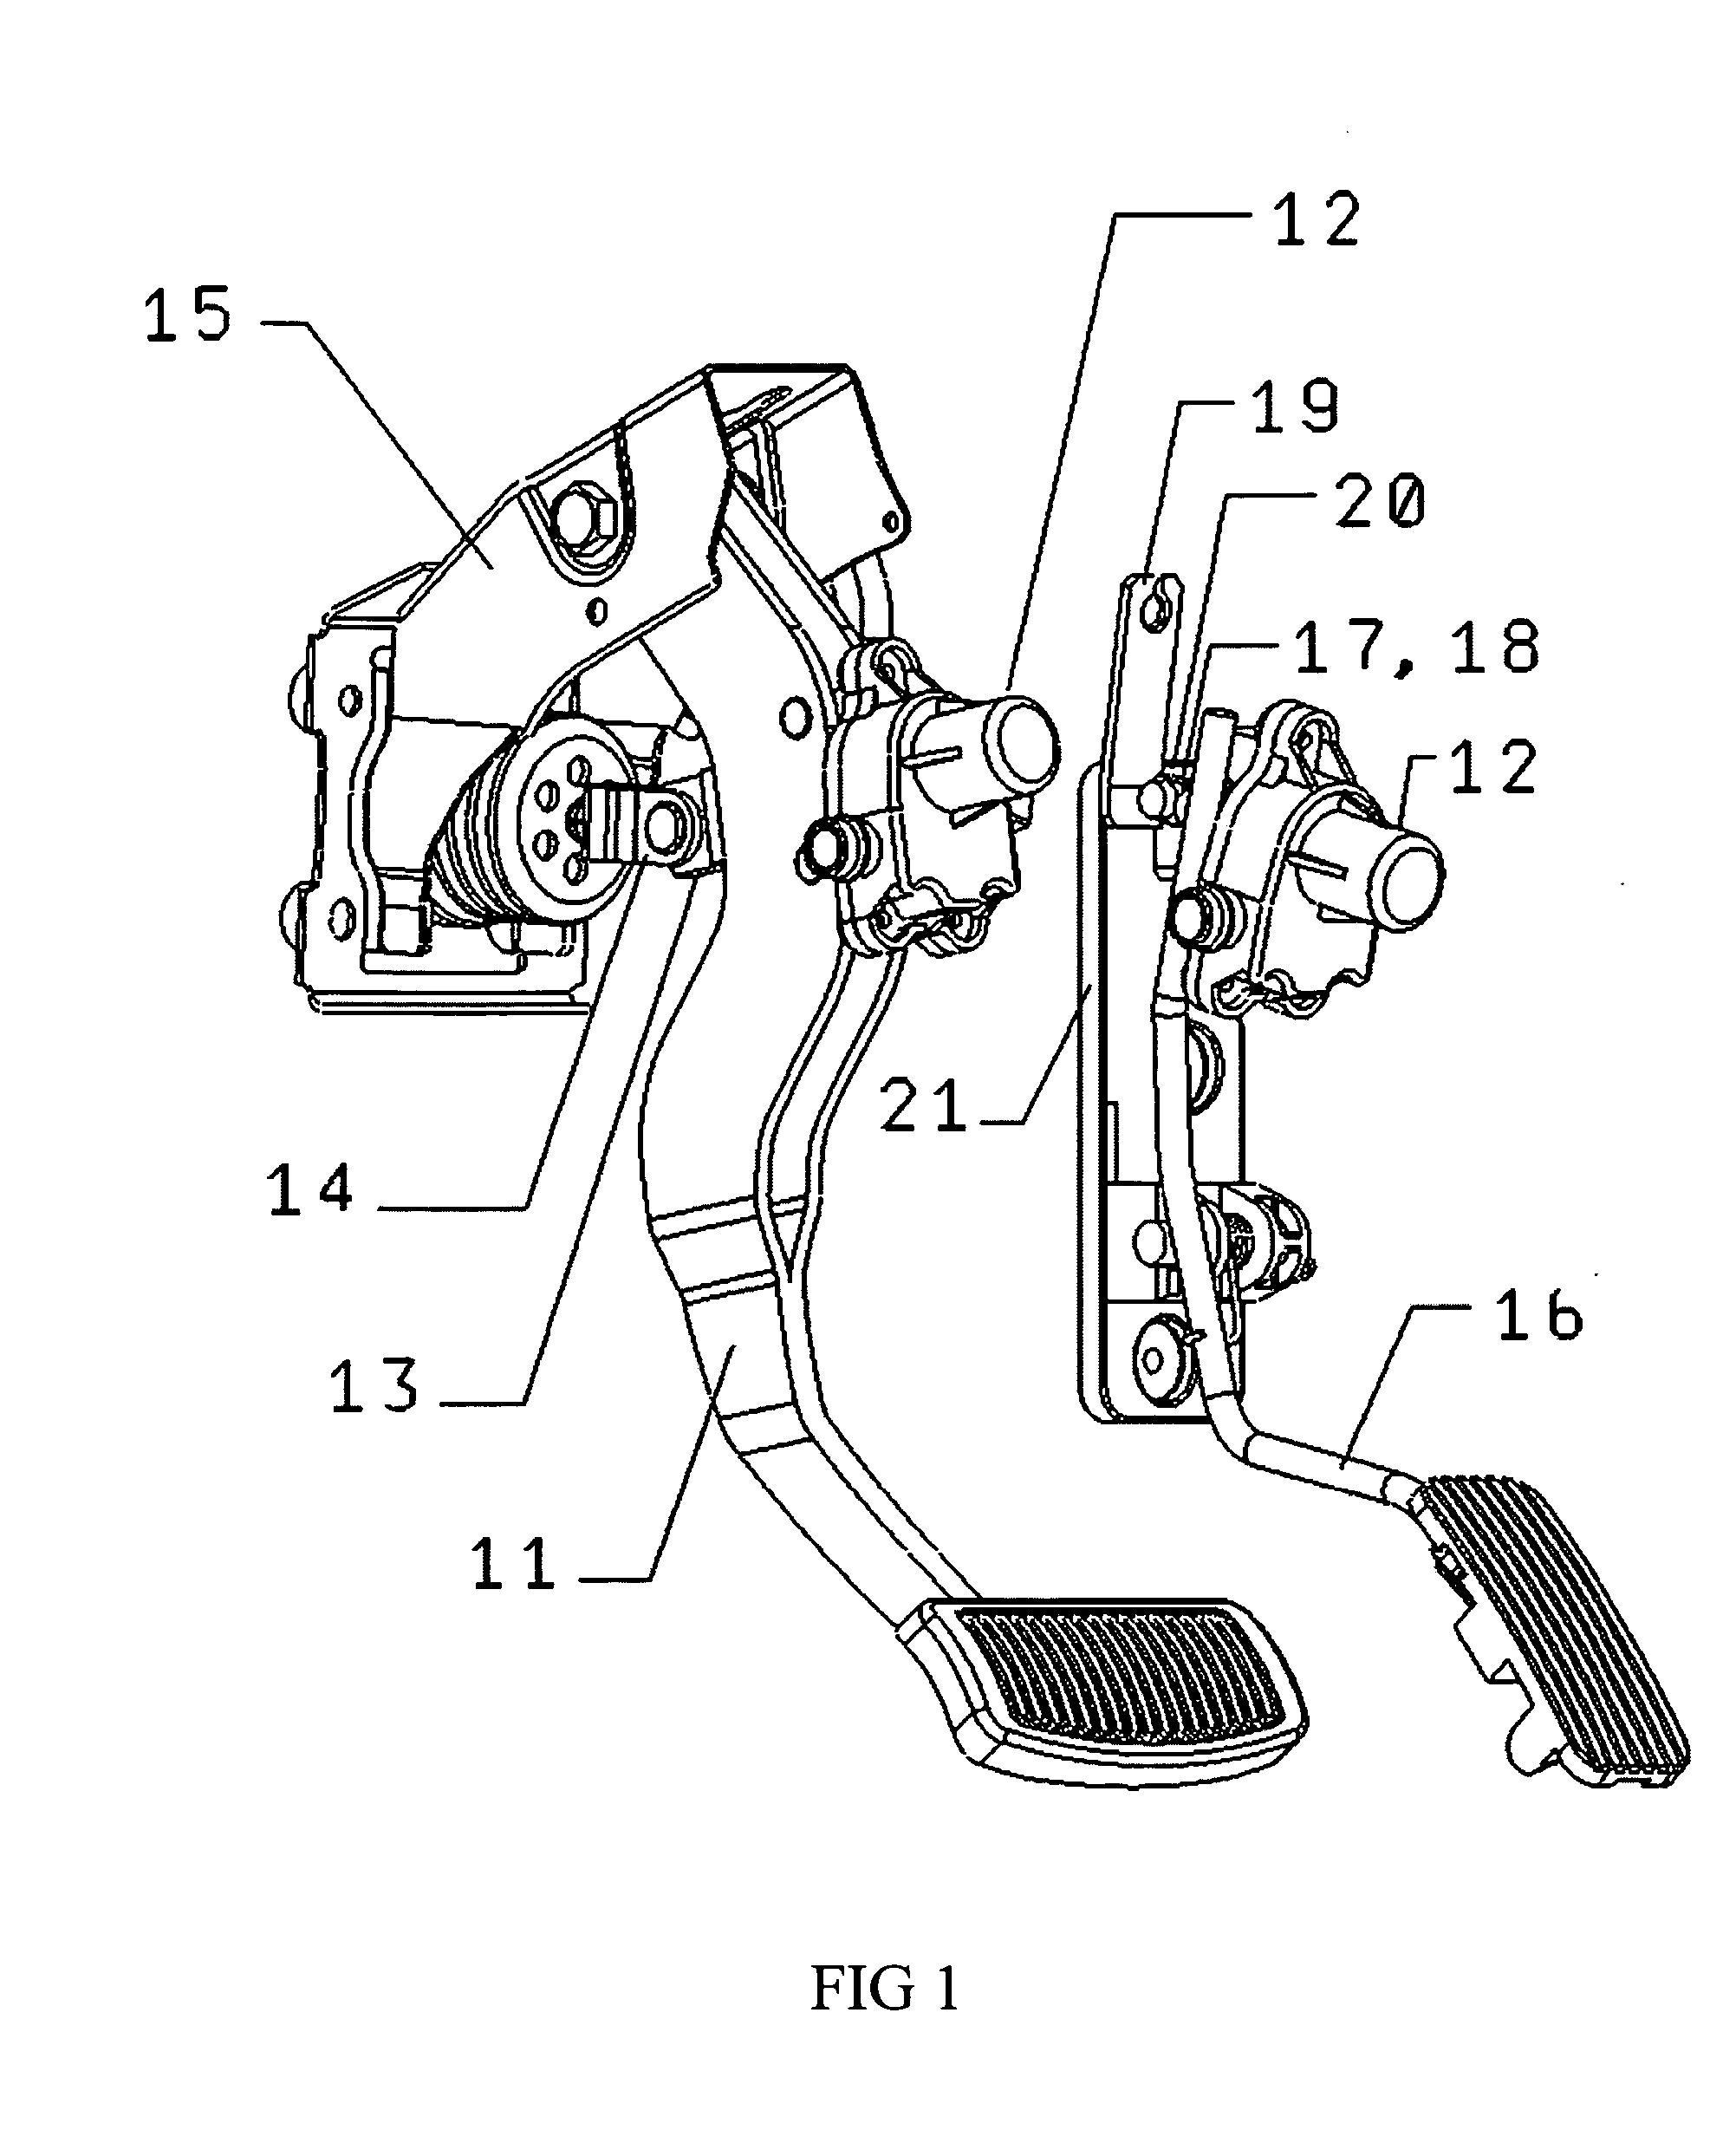 Adjustable pedal assembly